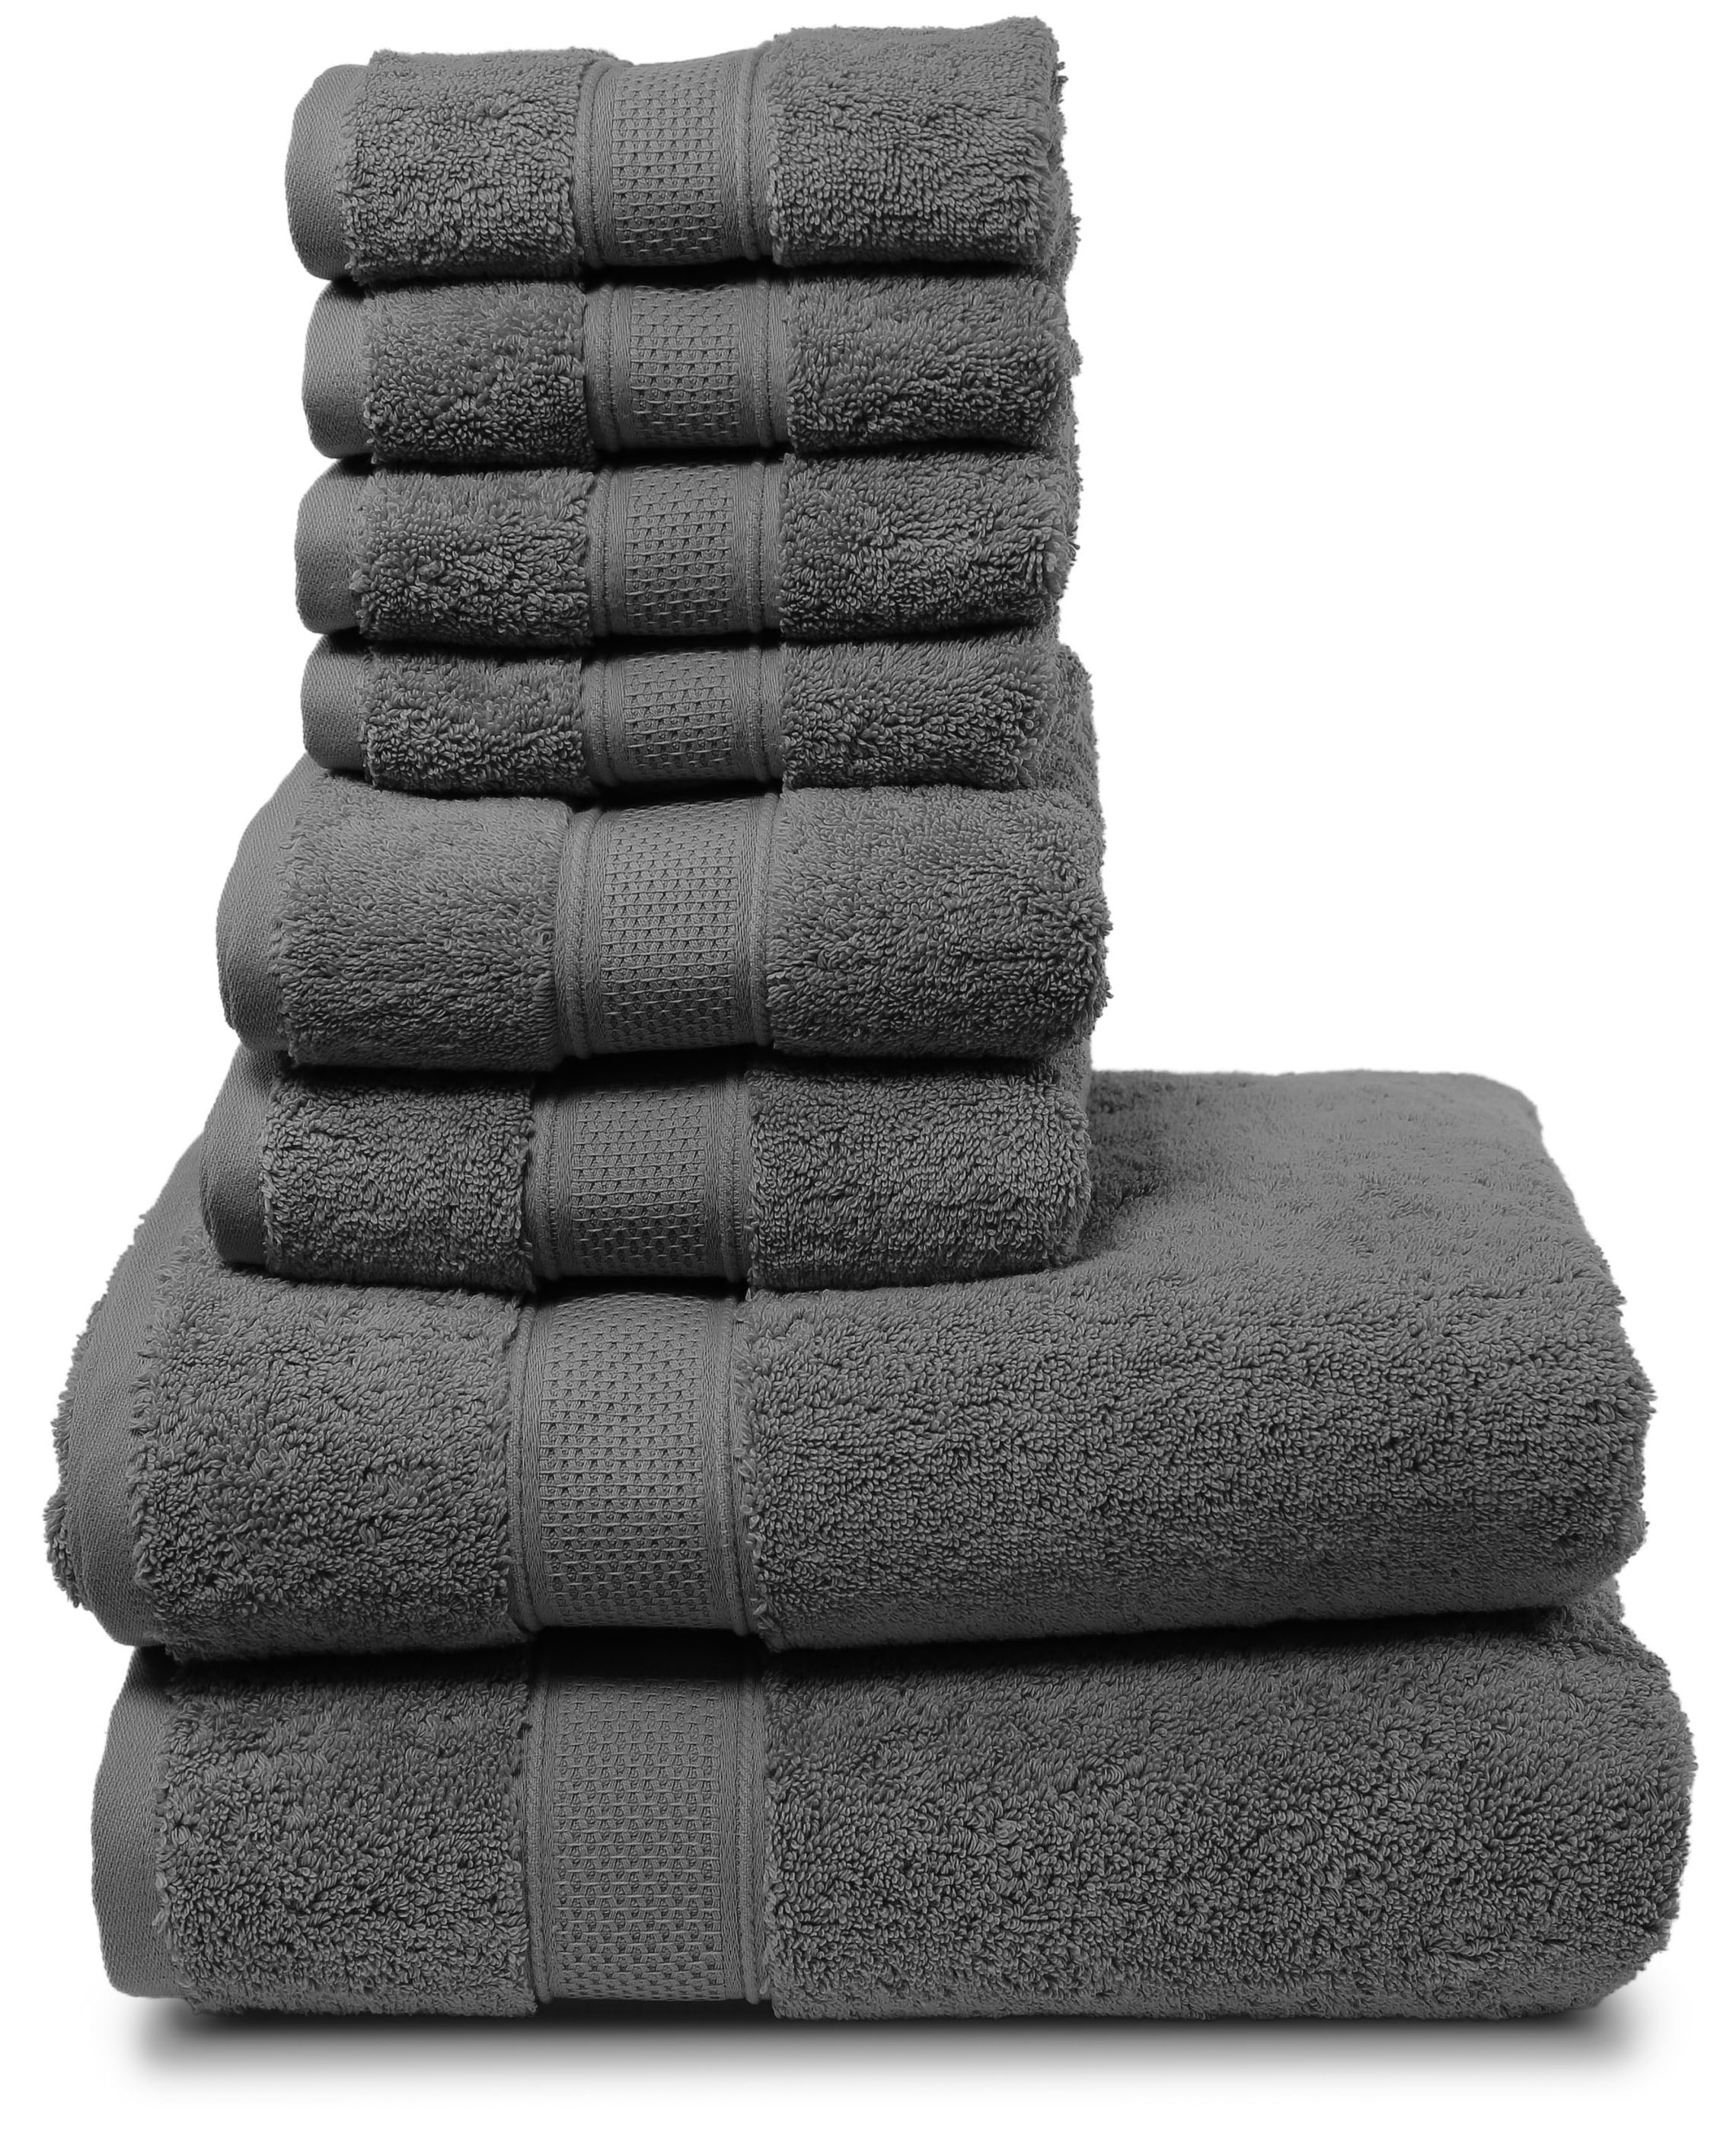 Maura Basics Performance Bath Towels with Hanging Loop. 30”x56” American  Standard Towel Size. Soft, Durable, Long Lasting and Absorbent 100% Turkish